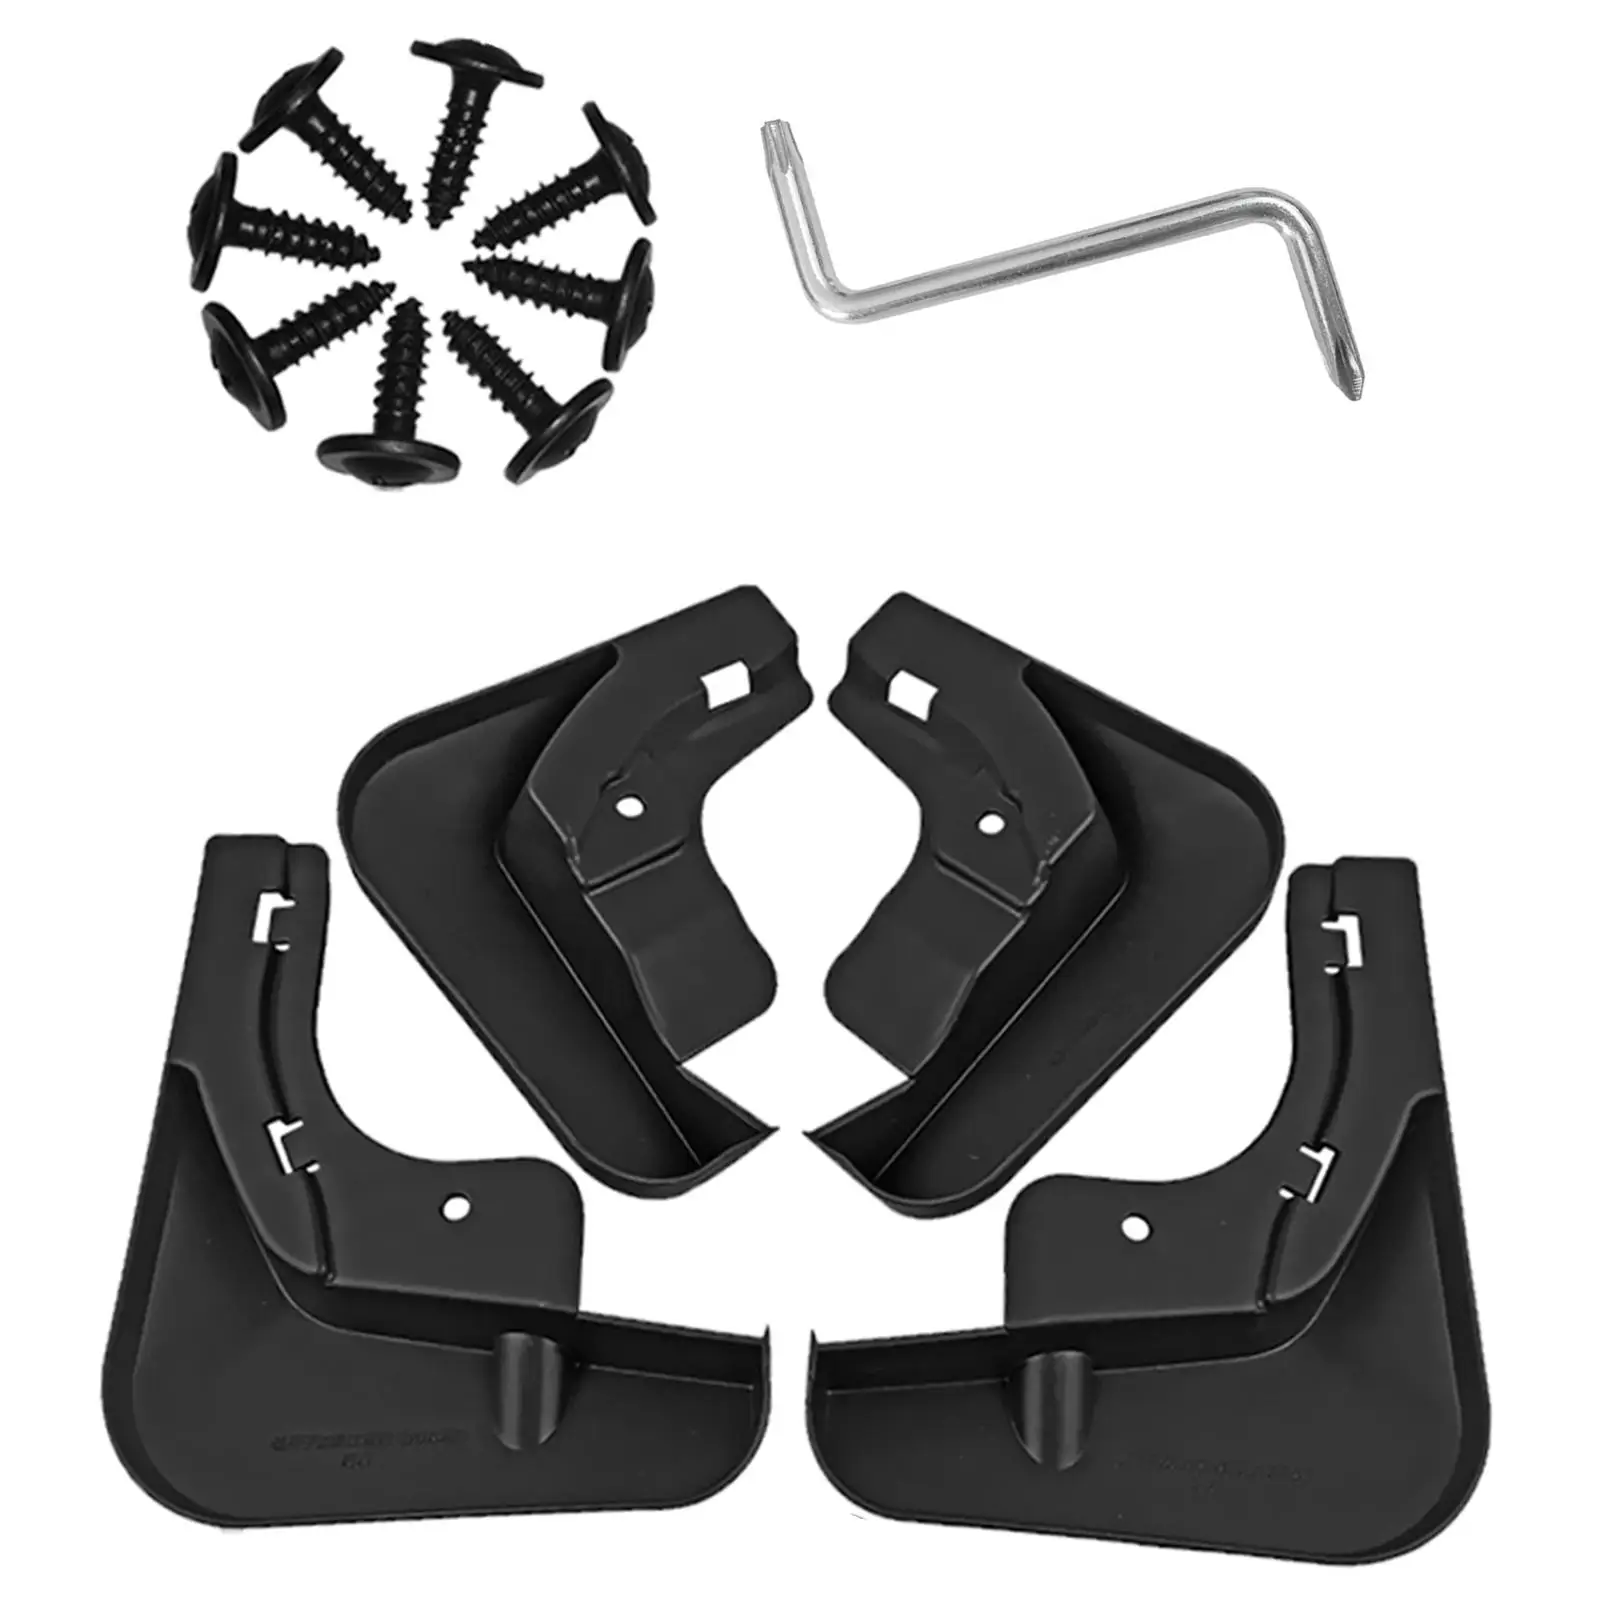 Splash Guards Mud Flaps Mudguards for Yuan Plus Sturdy and Flexible Accessories